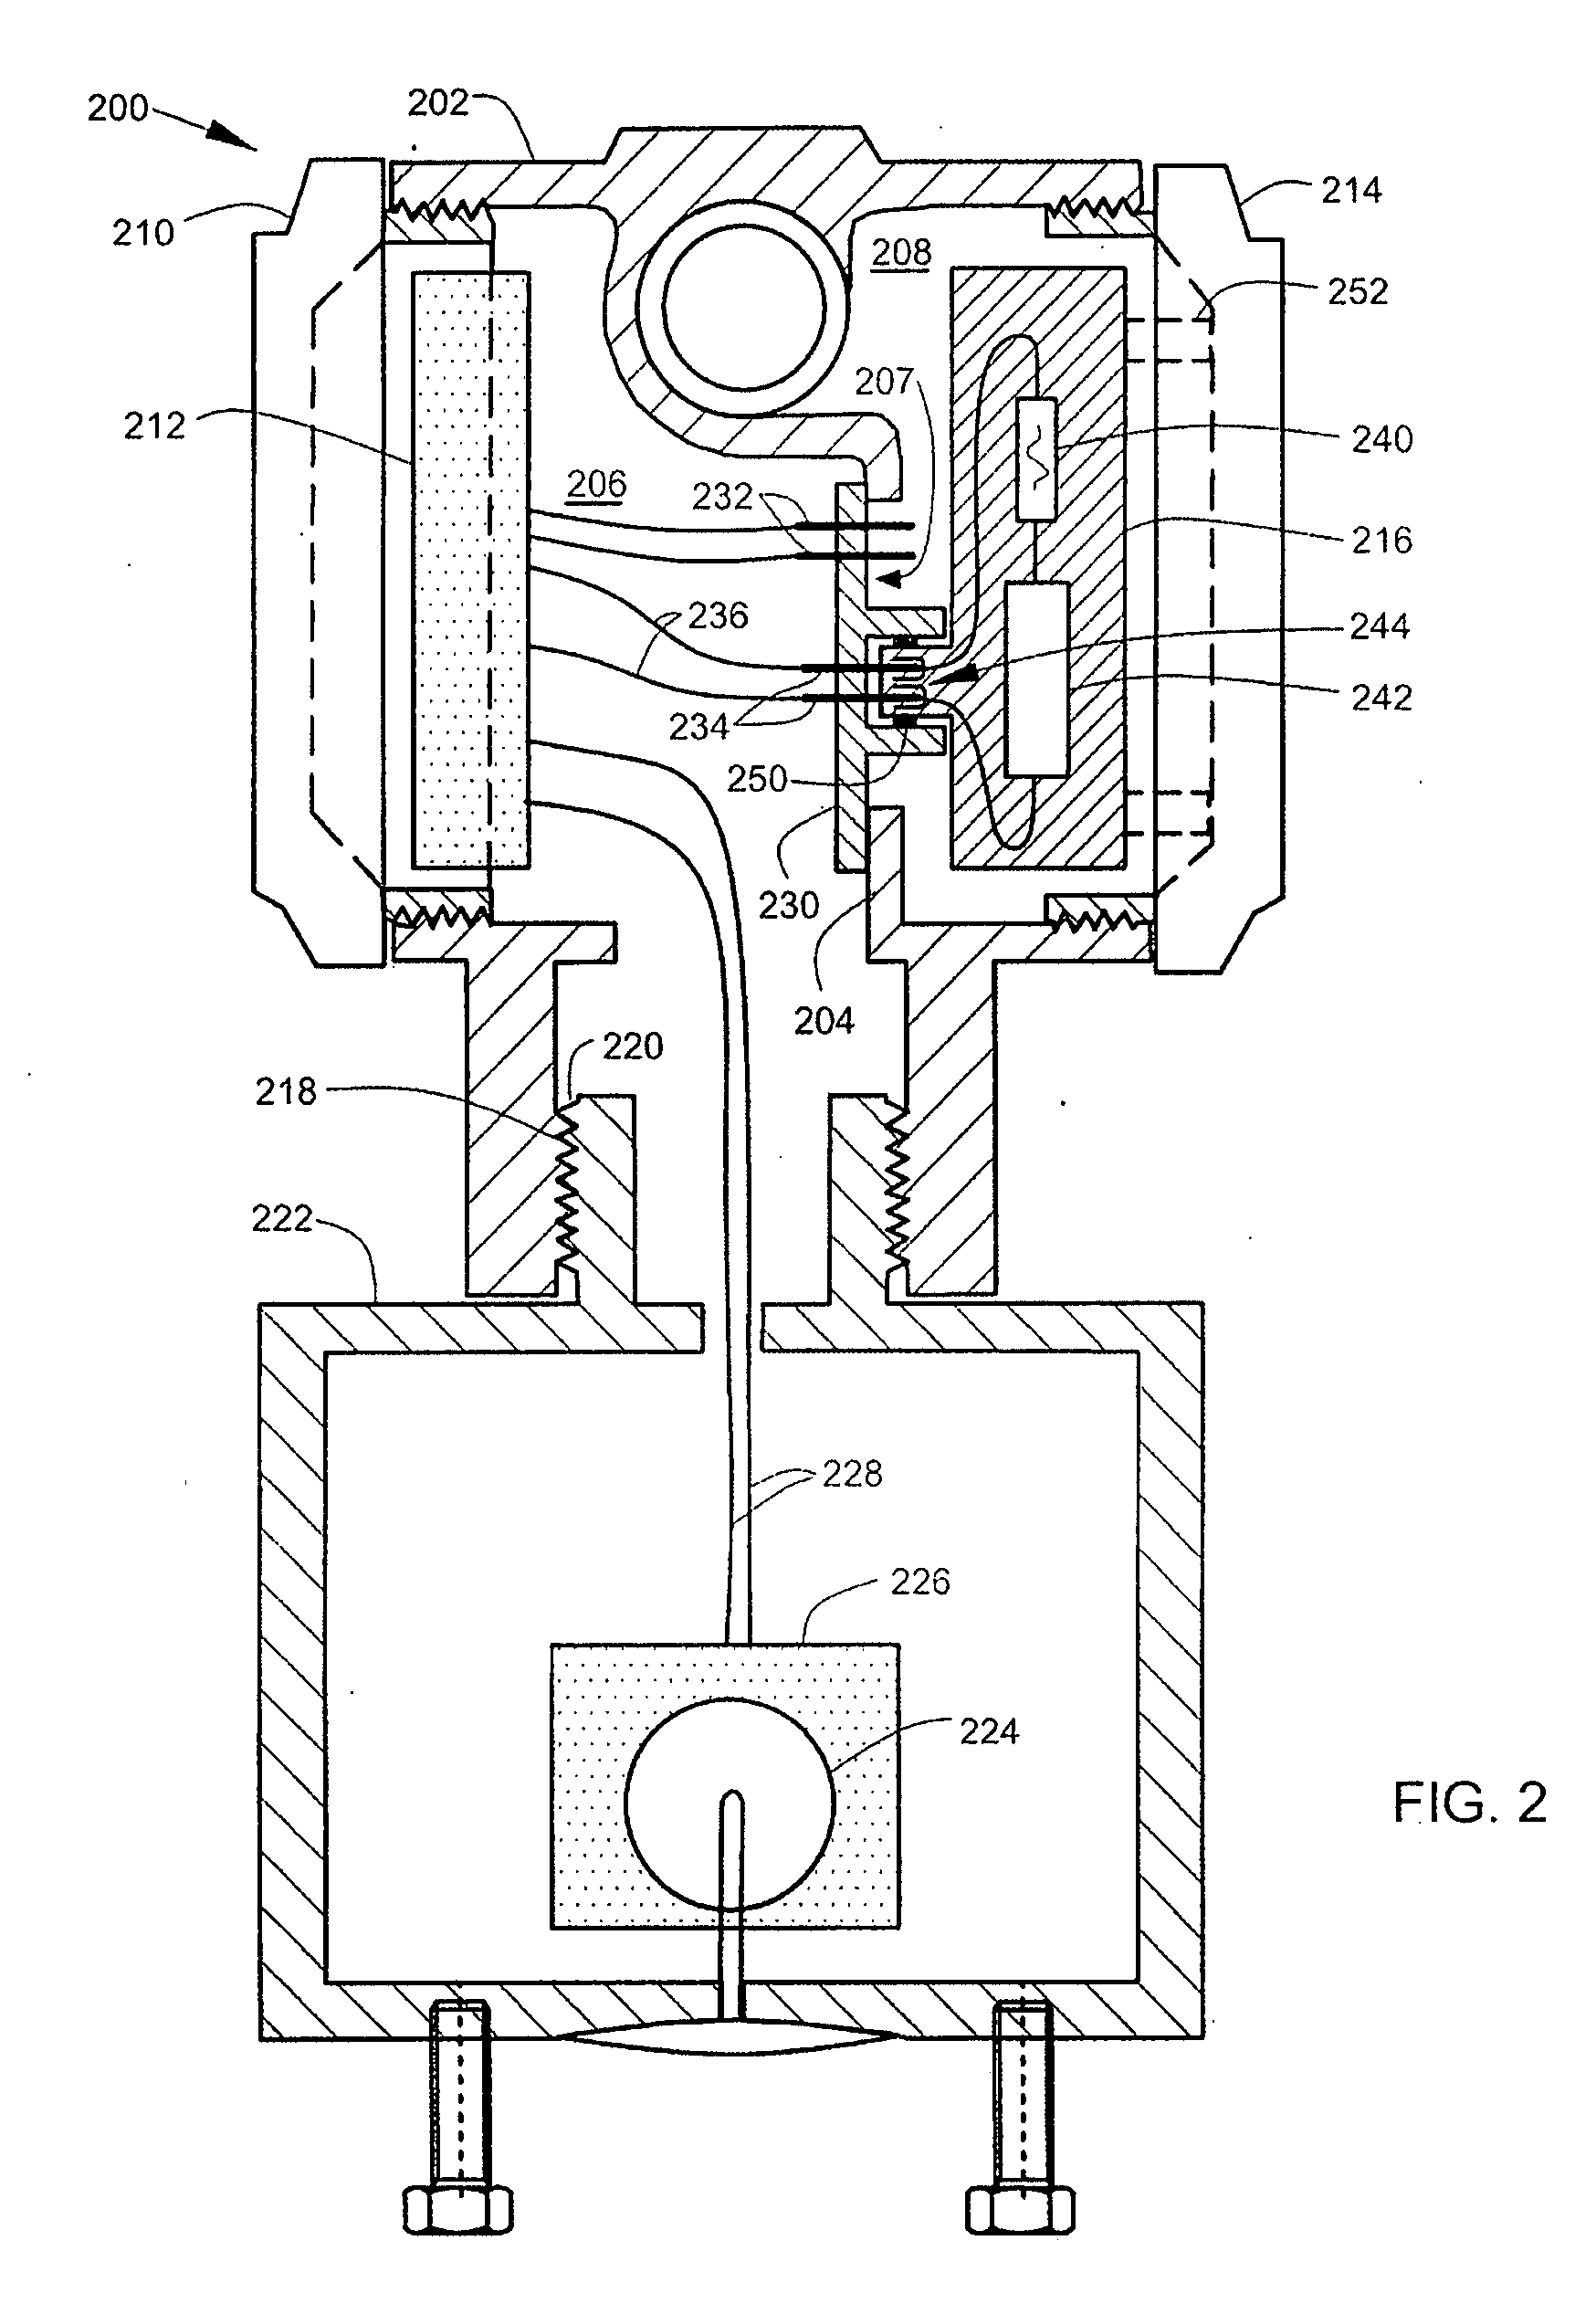 Industrial process field device with energy limited battery assembly